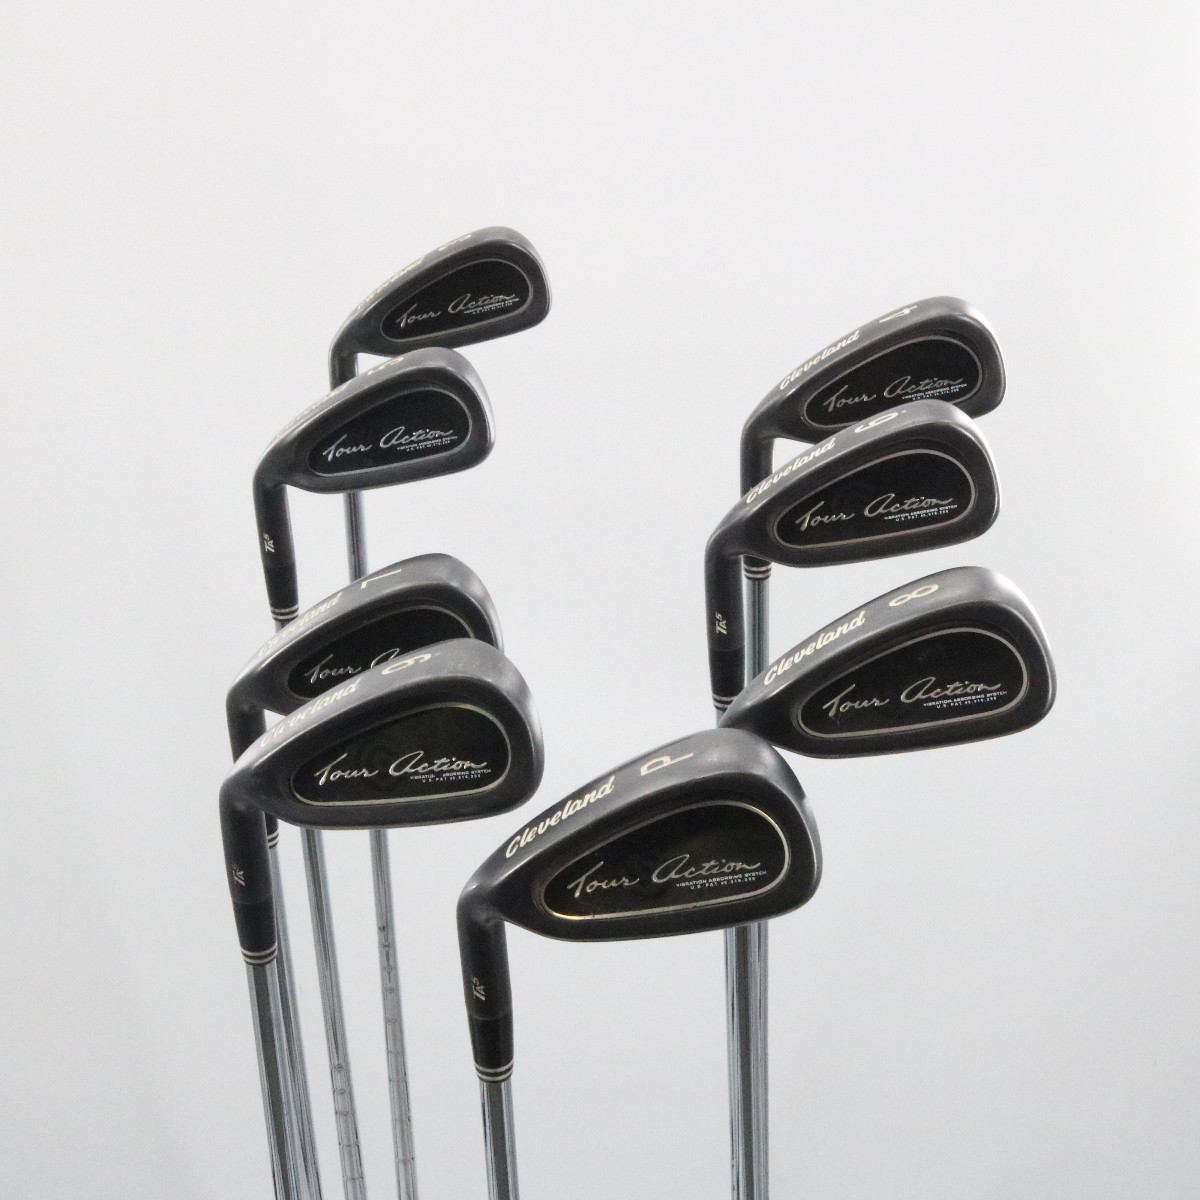 cleveland tour action irons black review